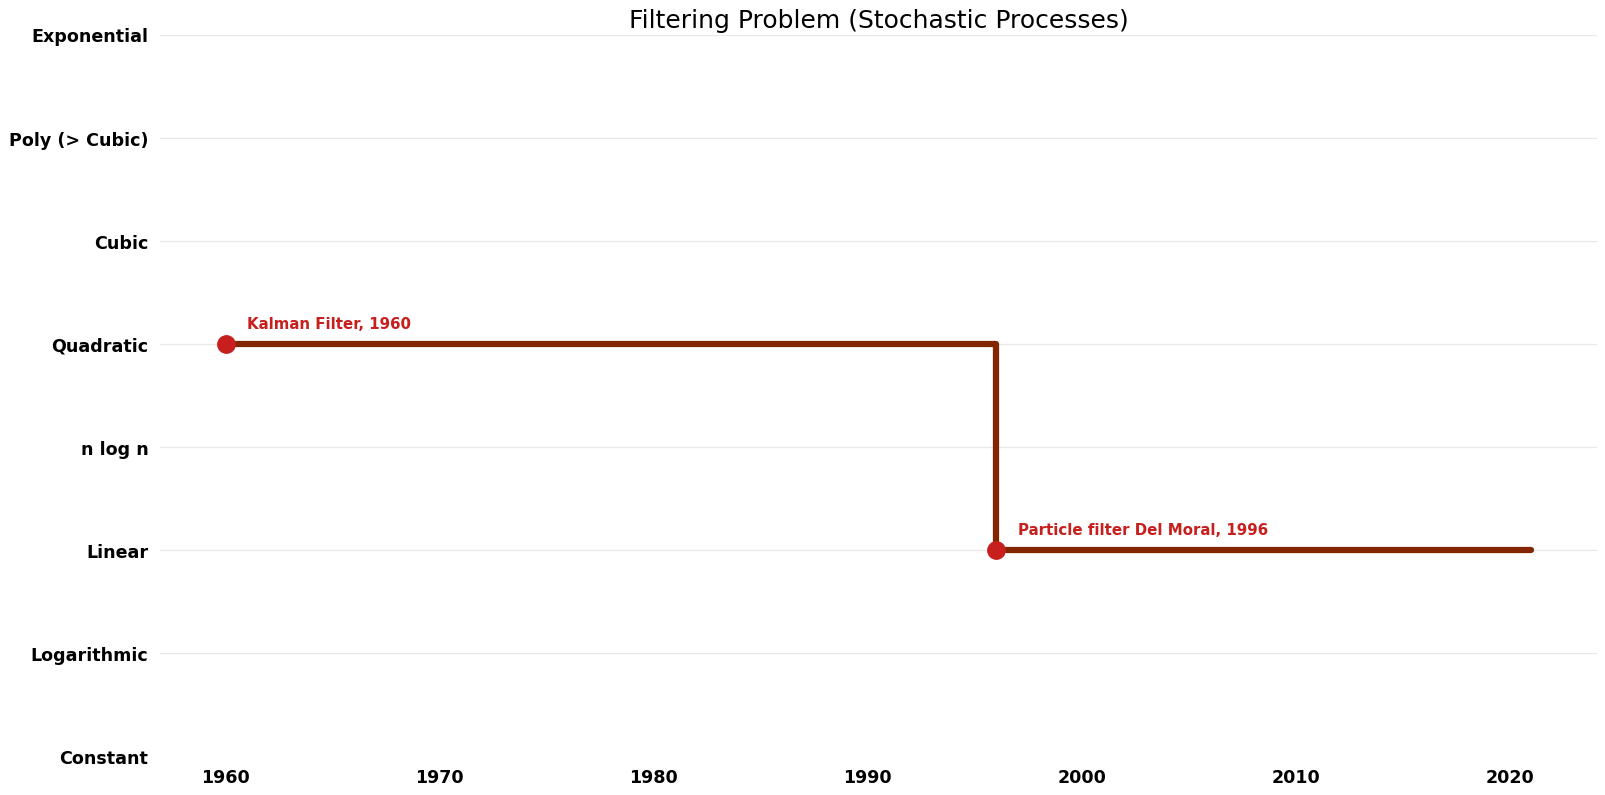 Filtering Problem (Stochastic Processes) - Space.png